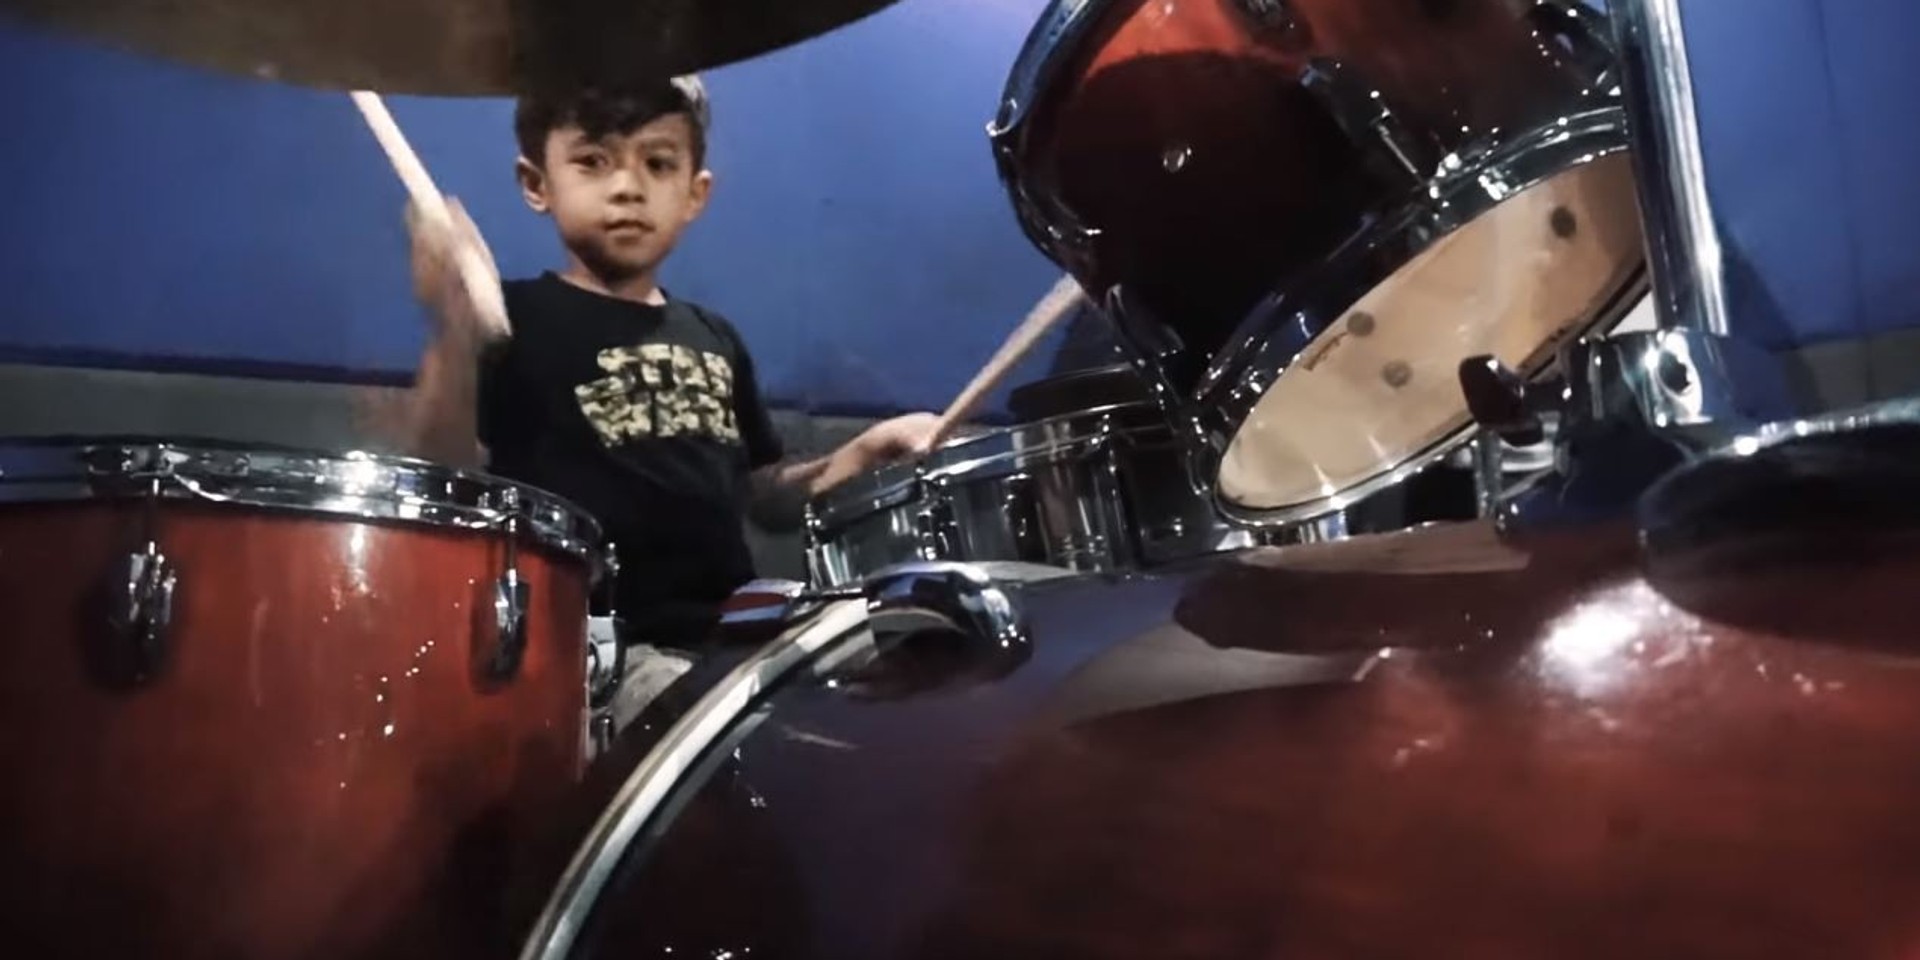 8-year-old drummer Momo DeMonster performs with Queso at B-Side Closing Party